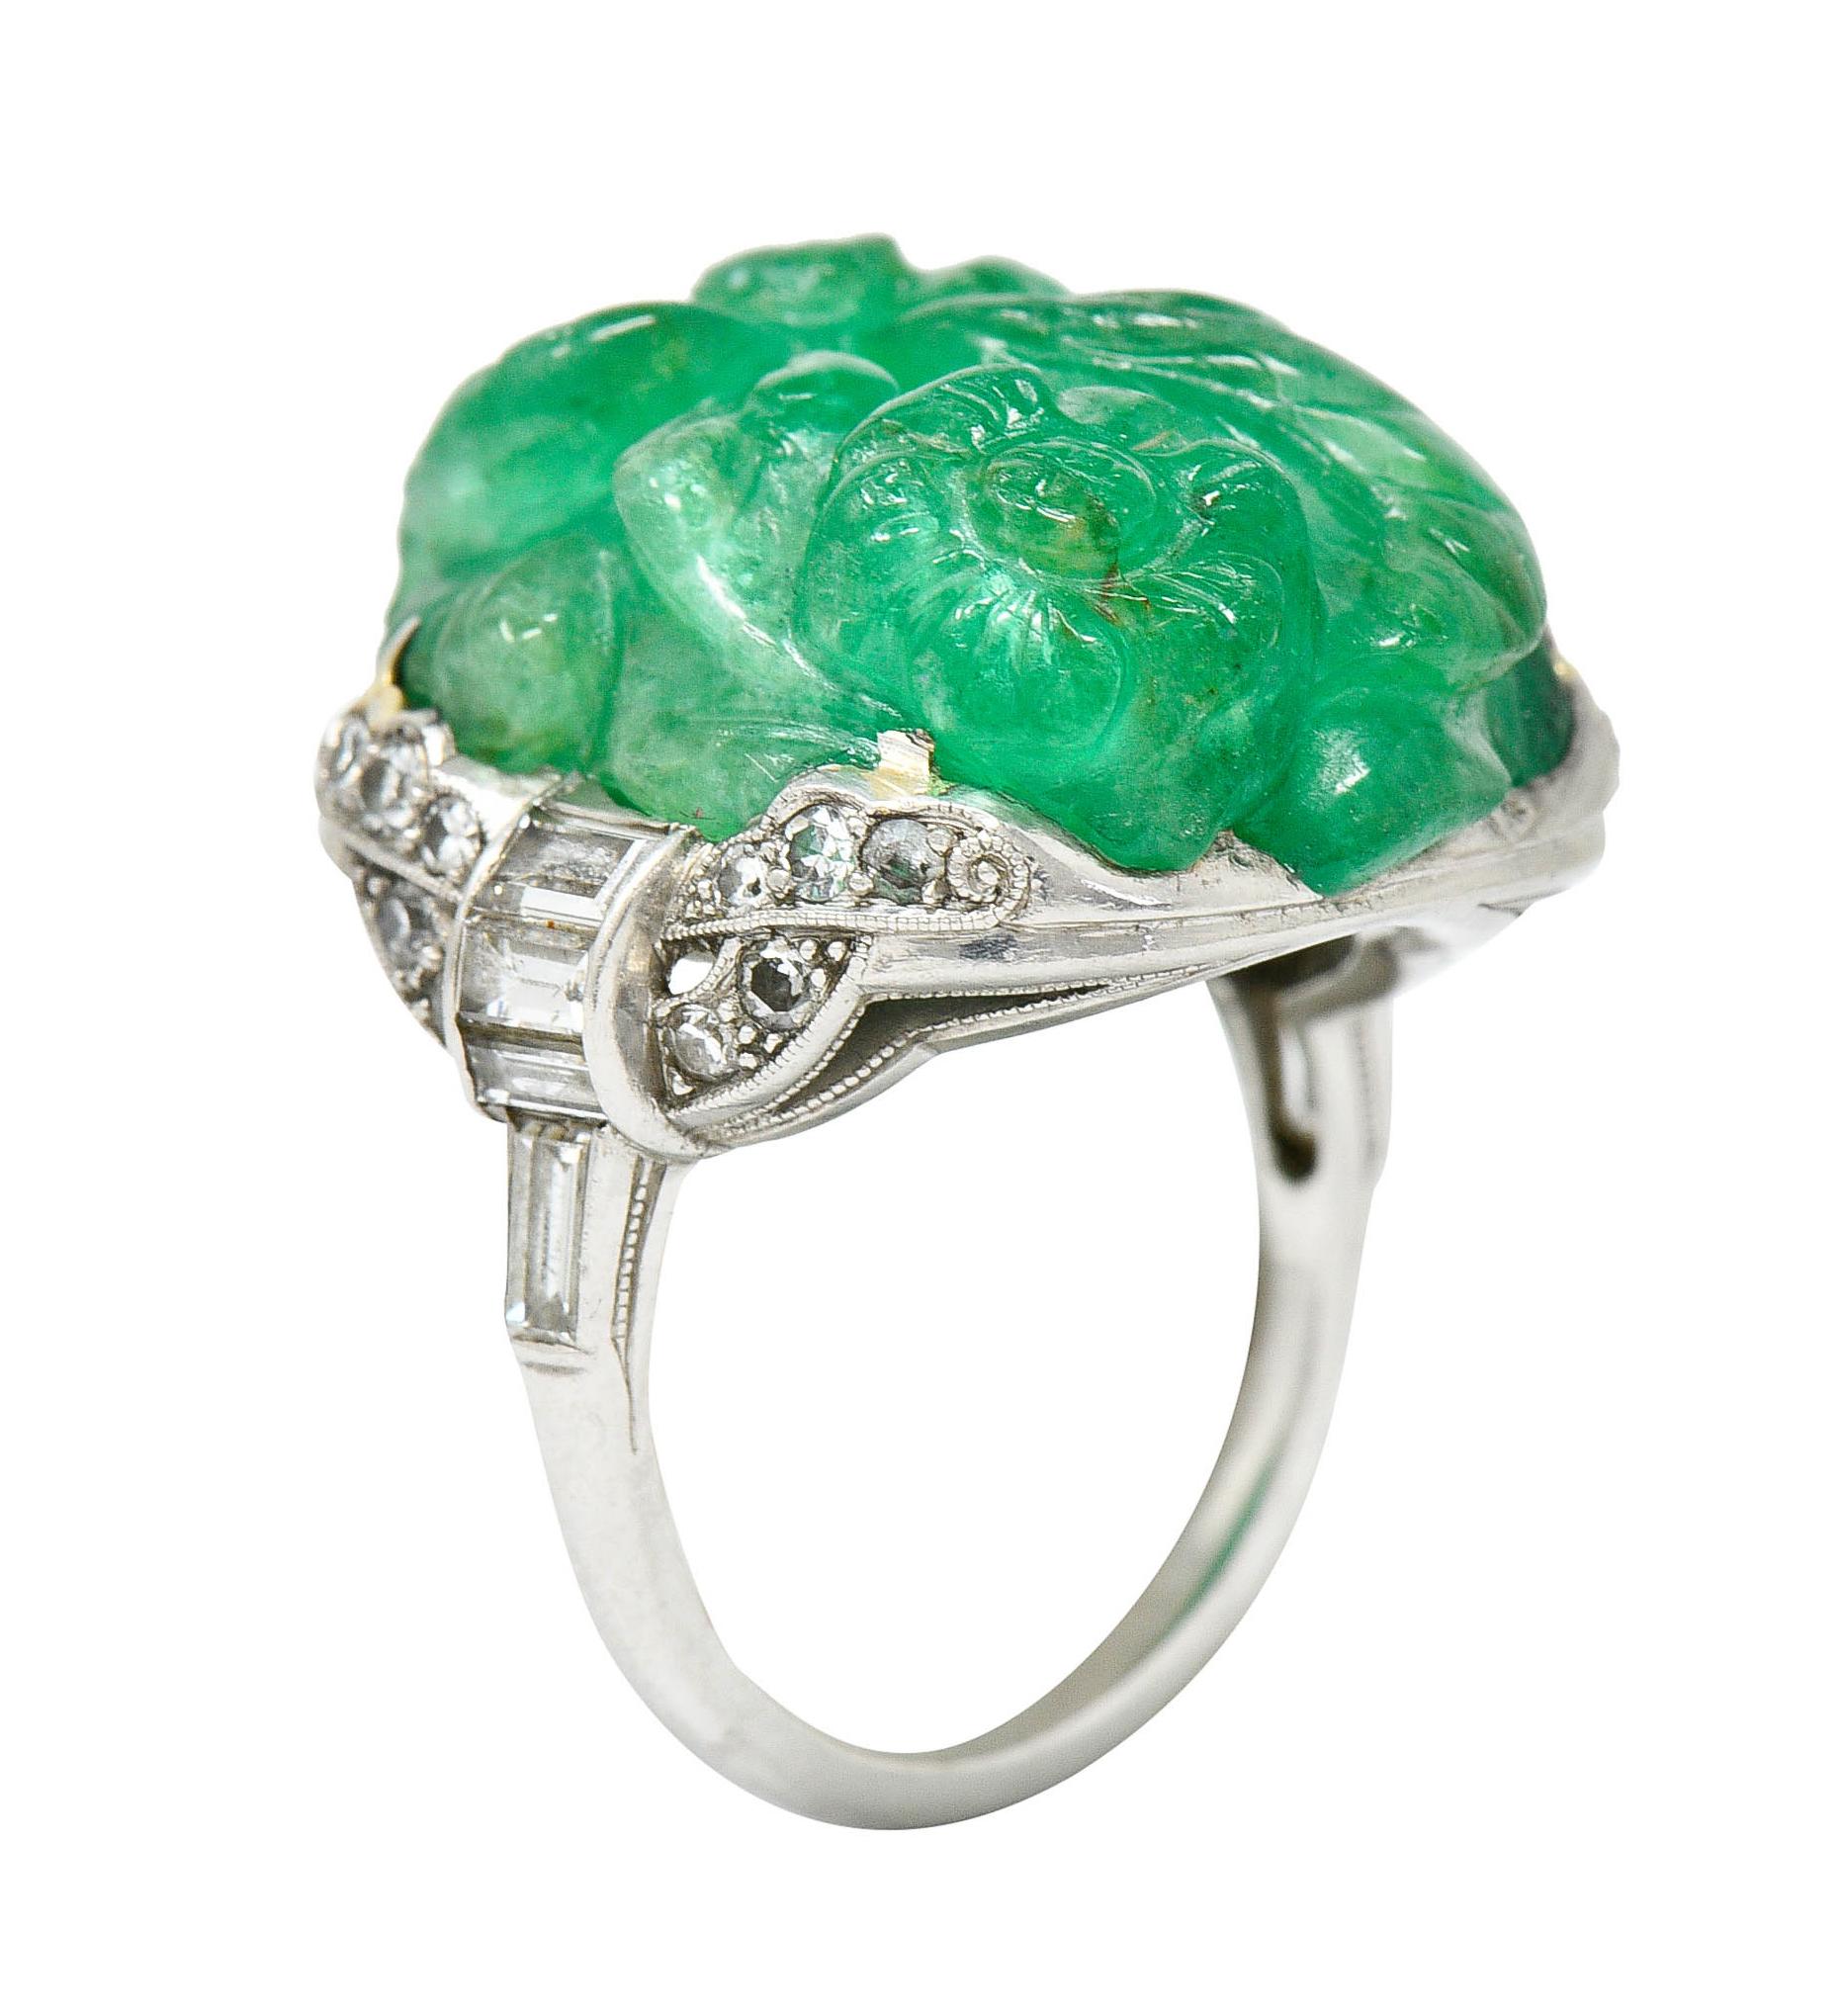 Centering a bright green Colombian emerald weighing approximately 15.00 carats

Deeply hand carved to depict a flourishing floral and foliate motif

Prong set in an ornately scalloped mounting accented by single and baguette cut diamonds, weighing